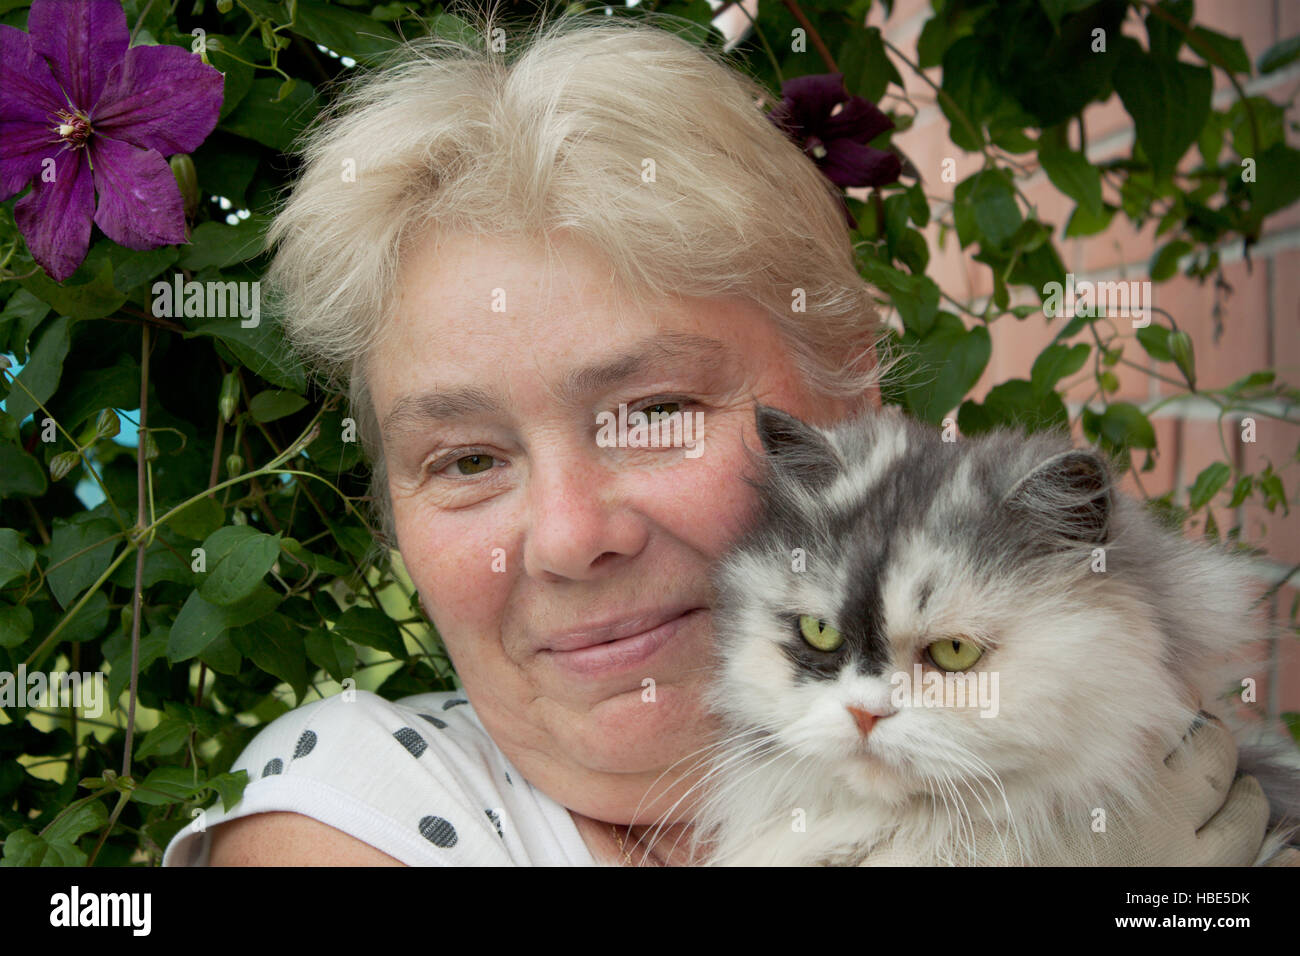 A housewife and her pet cat Stock Photo